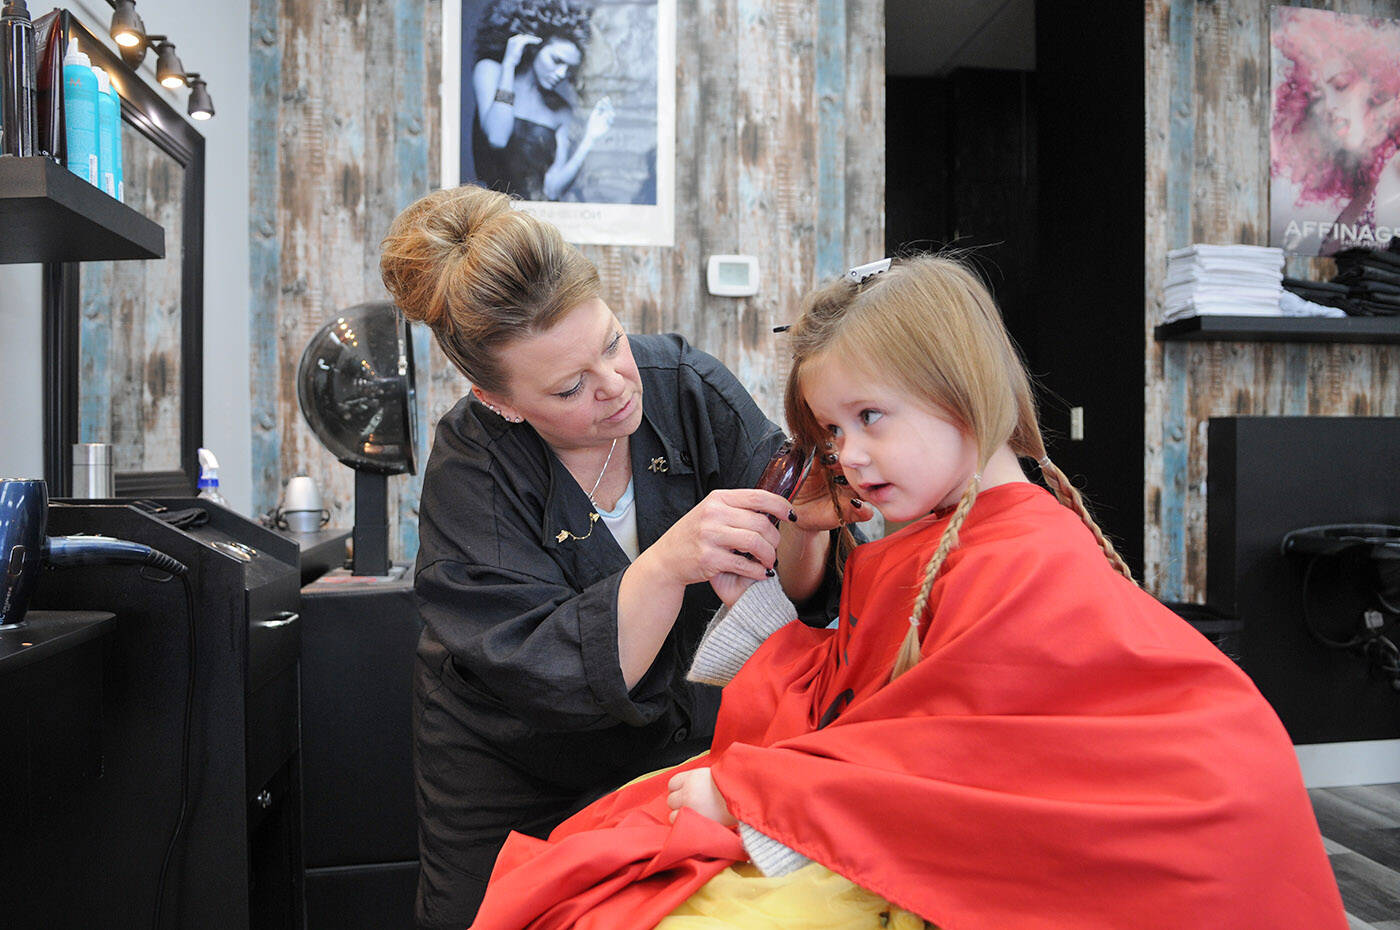 Three-year-old Kairi Ketler holds the clippers as Brenda Miller gives Kairi her first haircut at Sassy Cuts on Friday, Dec. 16, 2022. Kairi is donating her 12-inch ponytails to be made into wigs for kids, and is also fundraising for charity. (Jenna Hauck/ Chilliwack Progess)